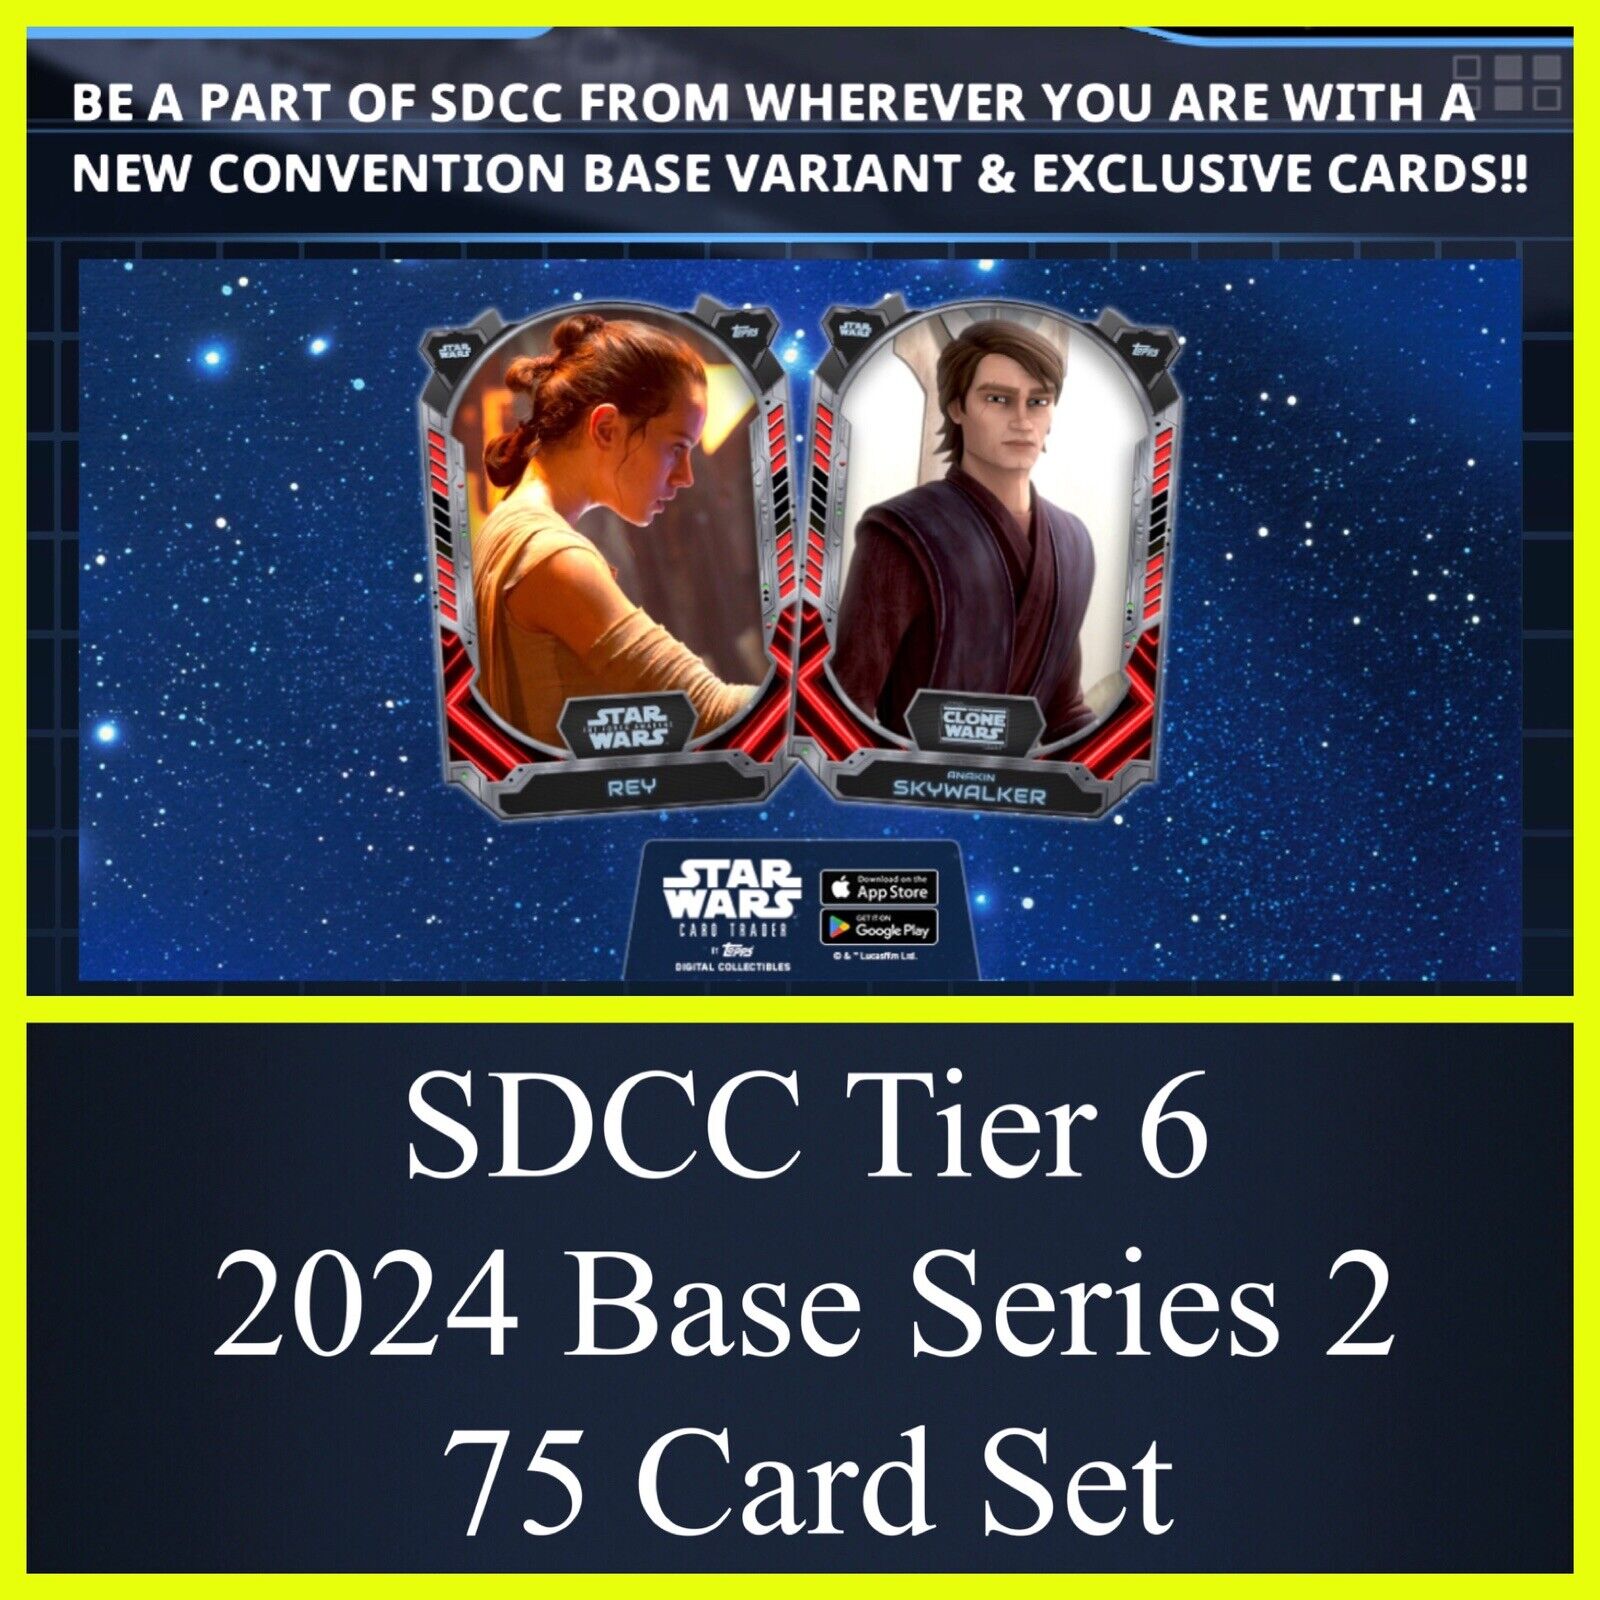 SDCC TIER 6 BASE 2024 SERIES 2 SET OF 75 CARDS-TOPPS STAR WARS CARD TRADER